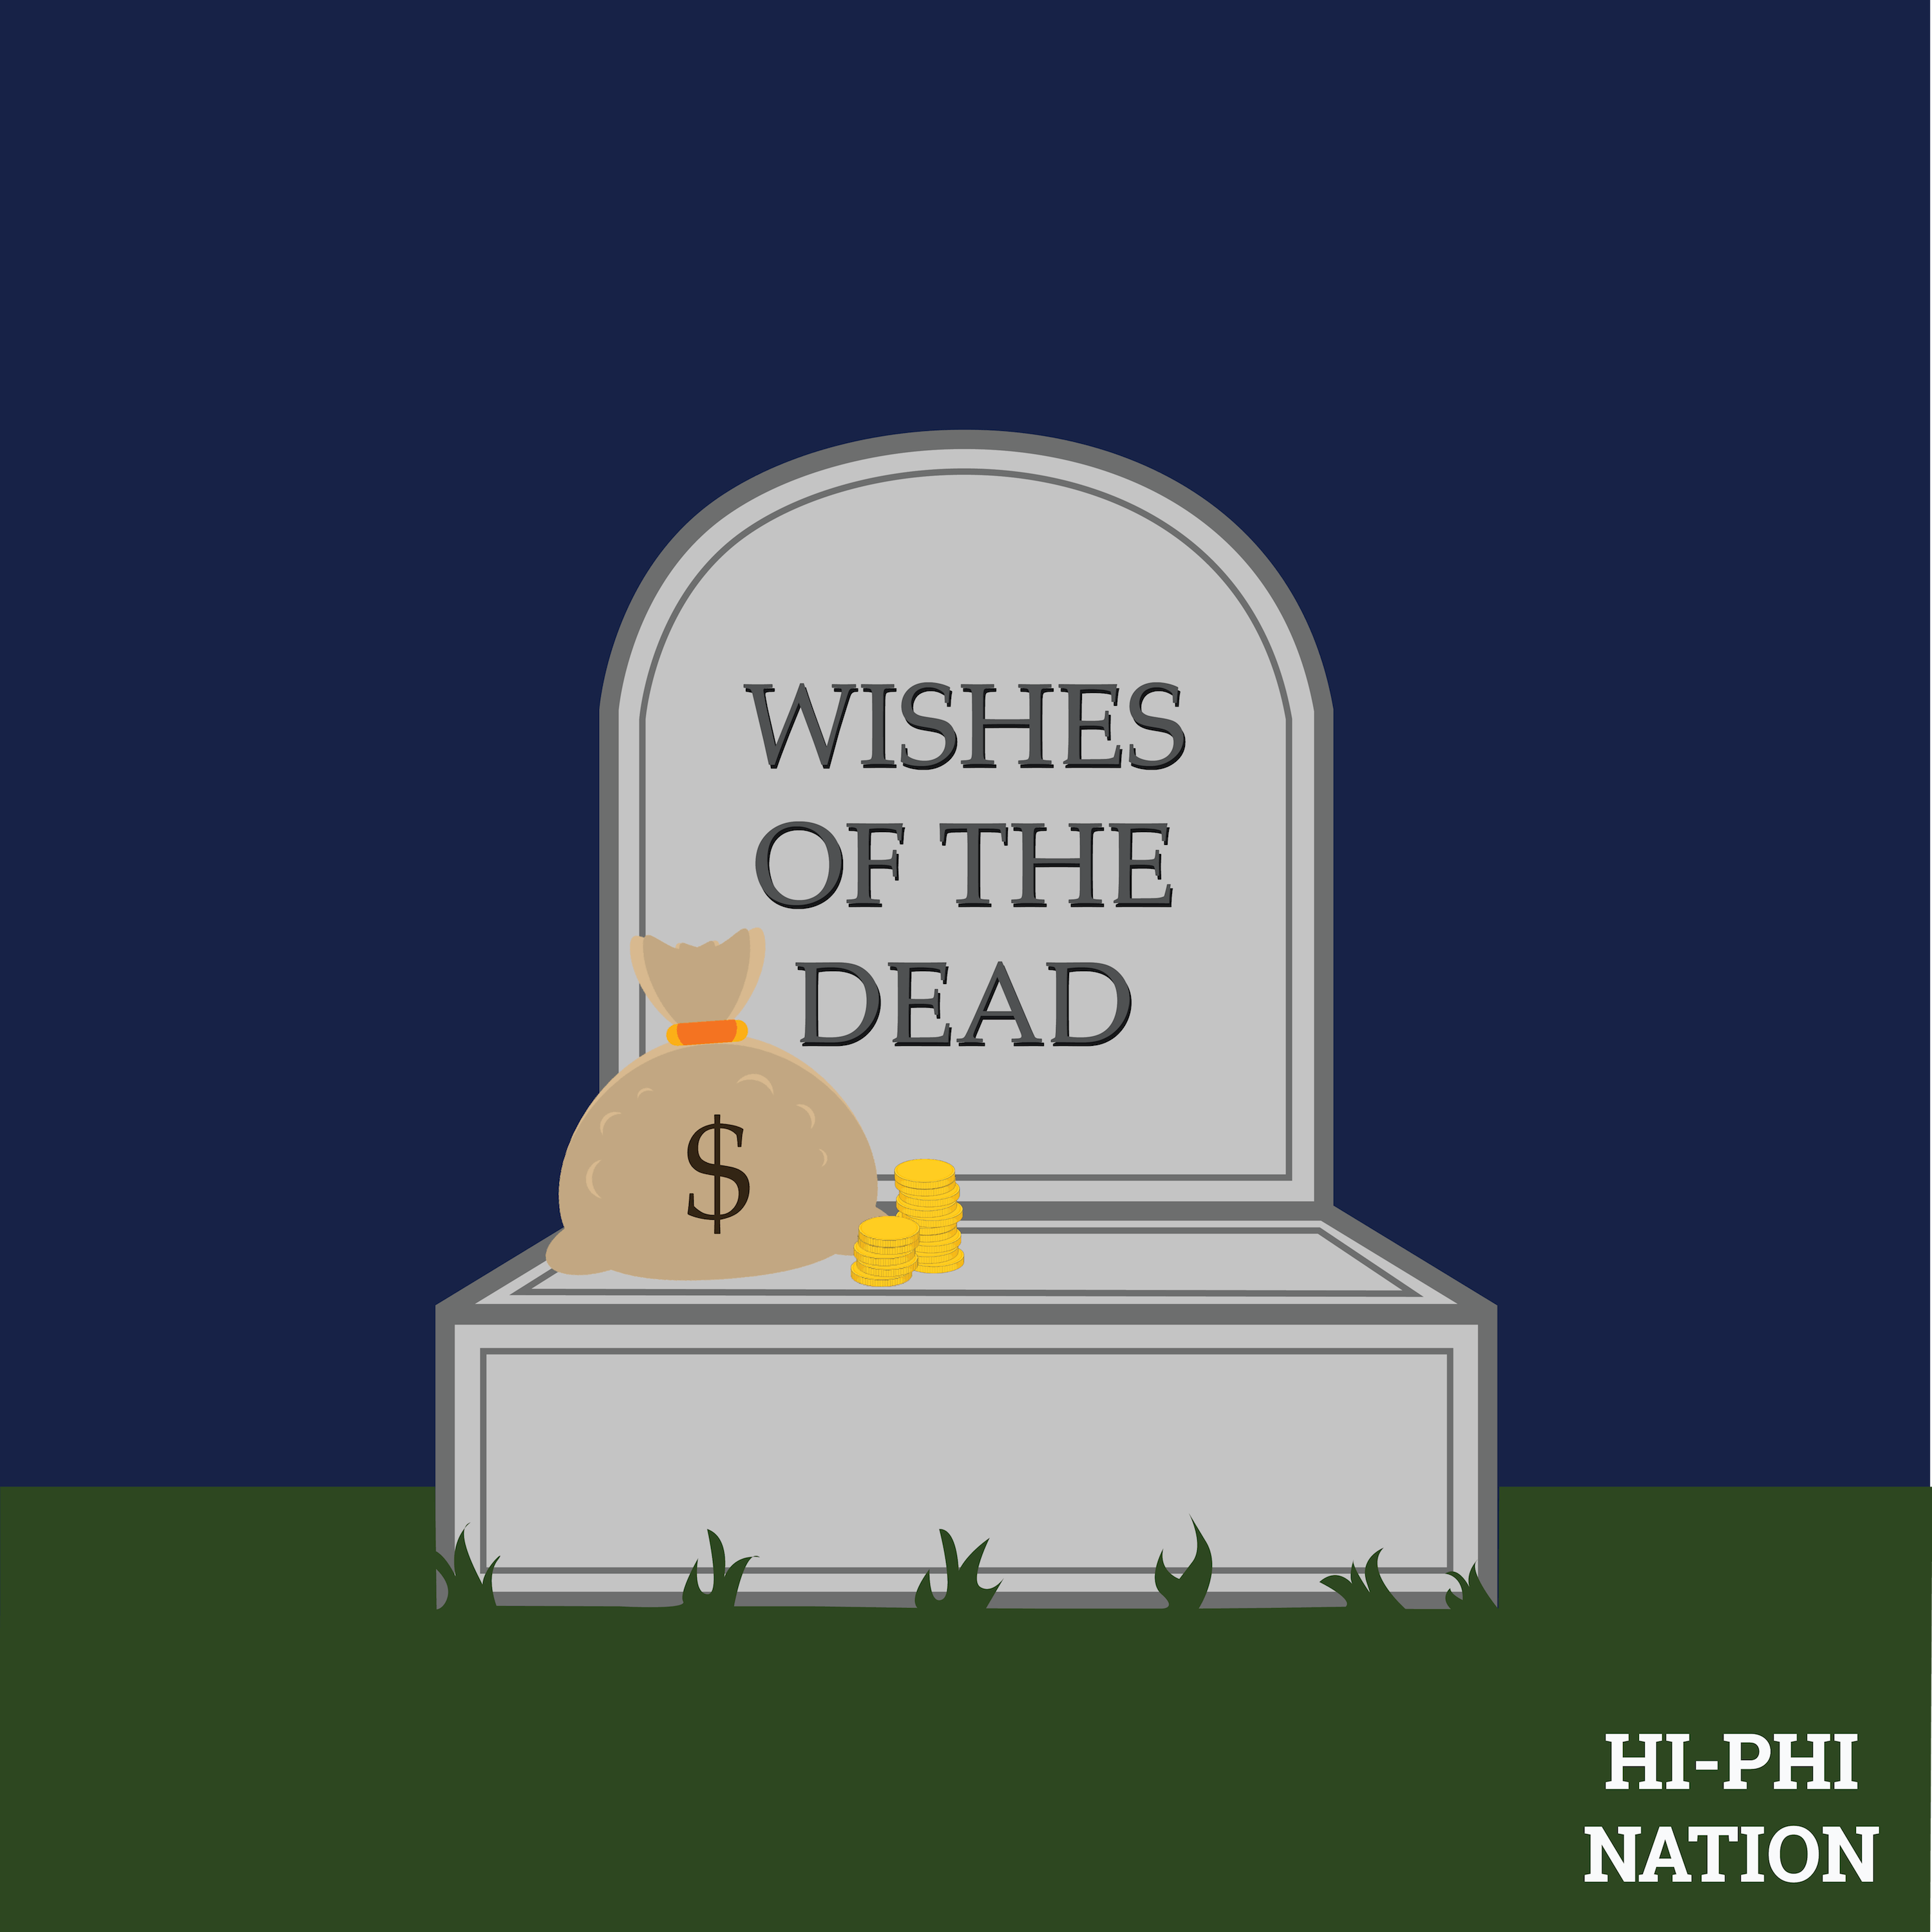 The Wishes of the Dead